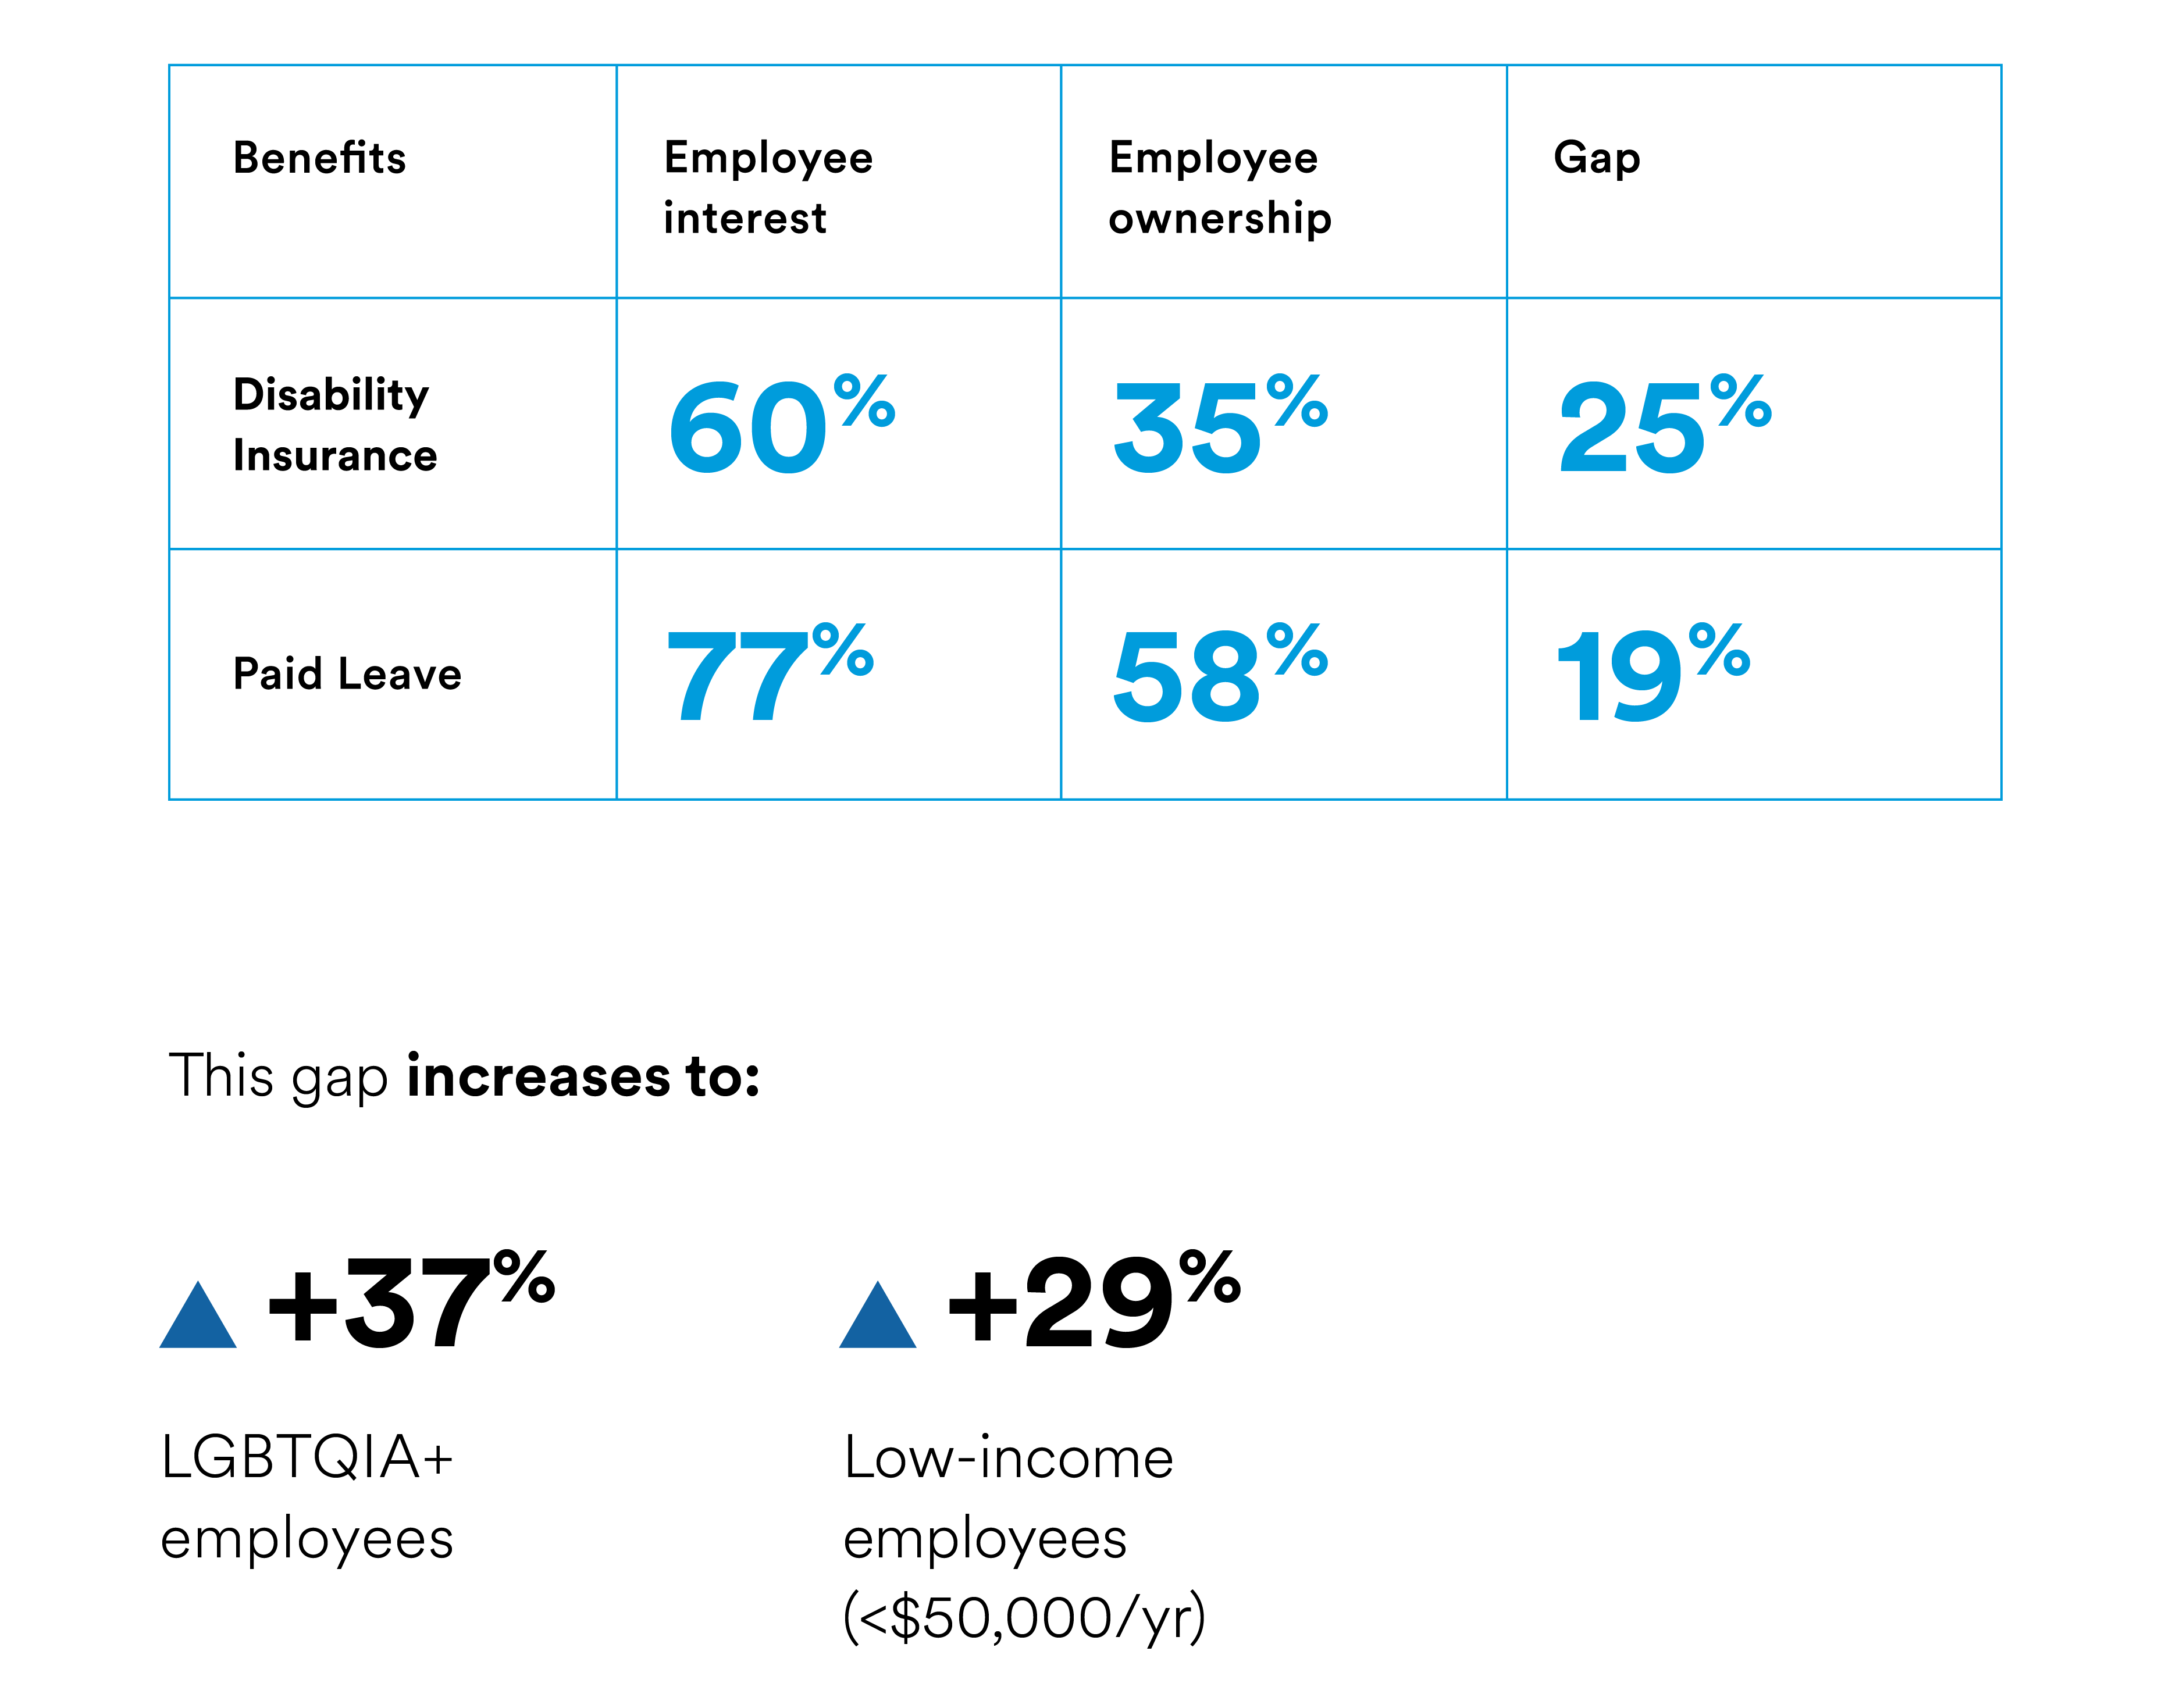 Gap between interest and ownership for both DI and paid leave